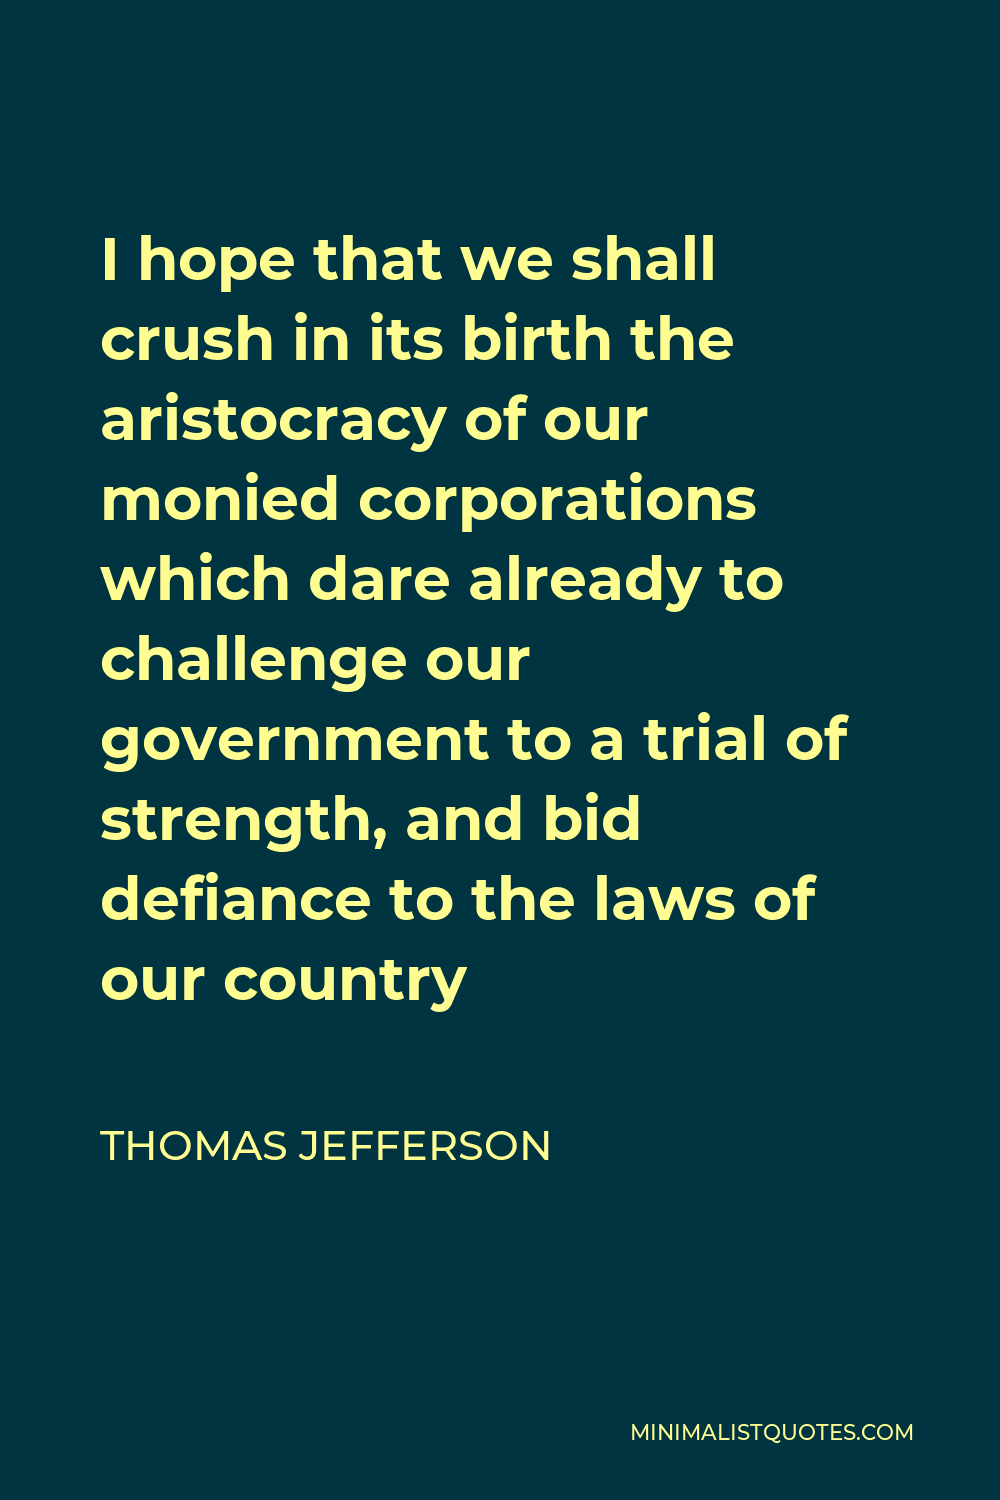 Thomas Jefferson Quote - I hope that we shall crush in its birth the aristocracy of our monied corporations which dare already to challenge our government to a trial of strength, and bid defiance to the laws of our country